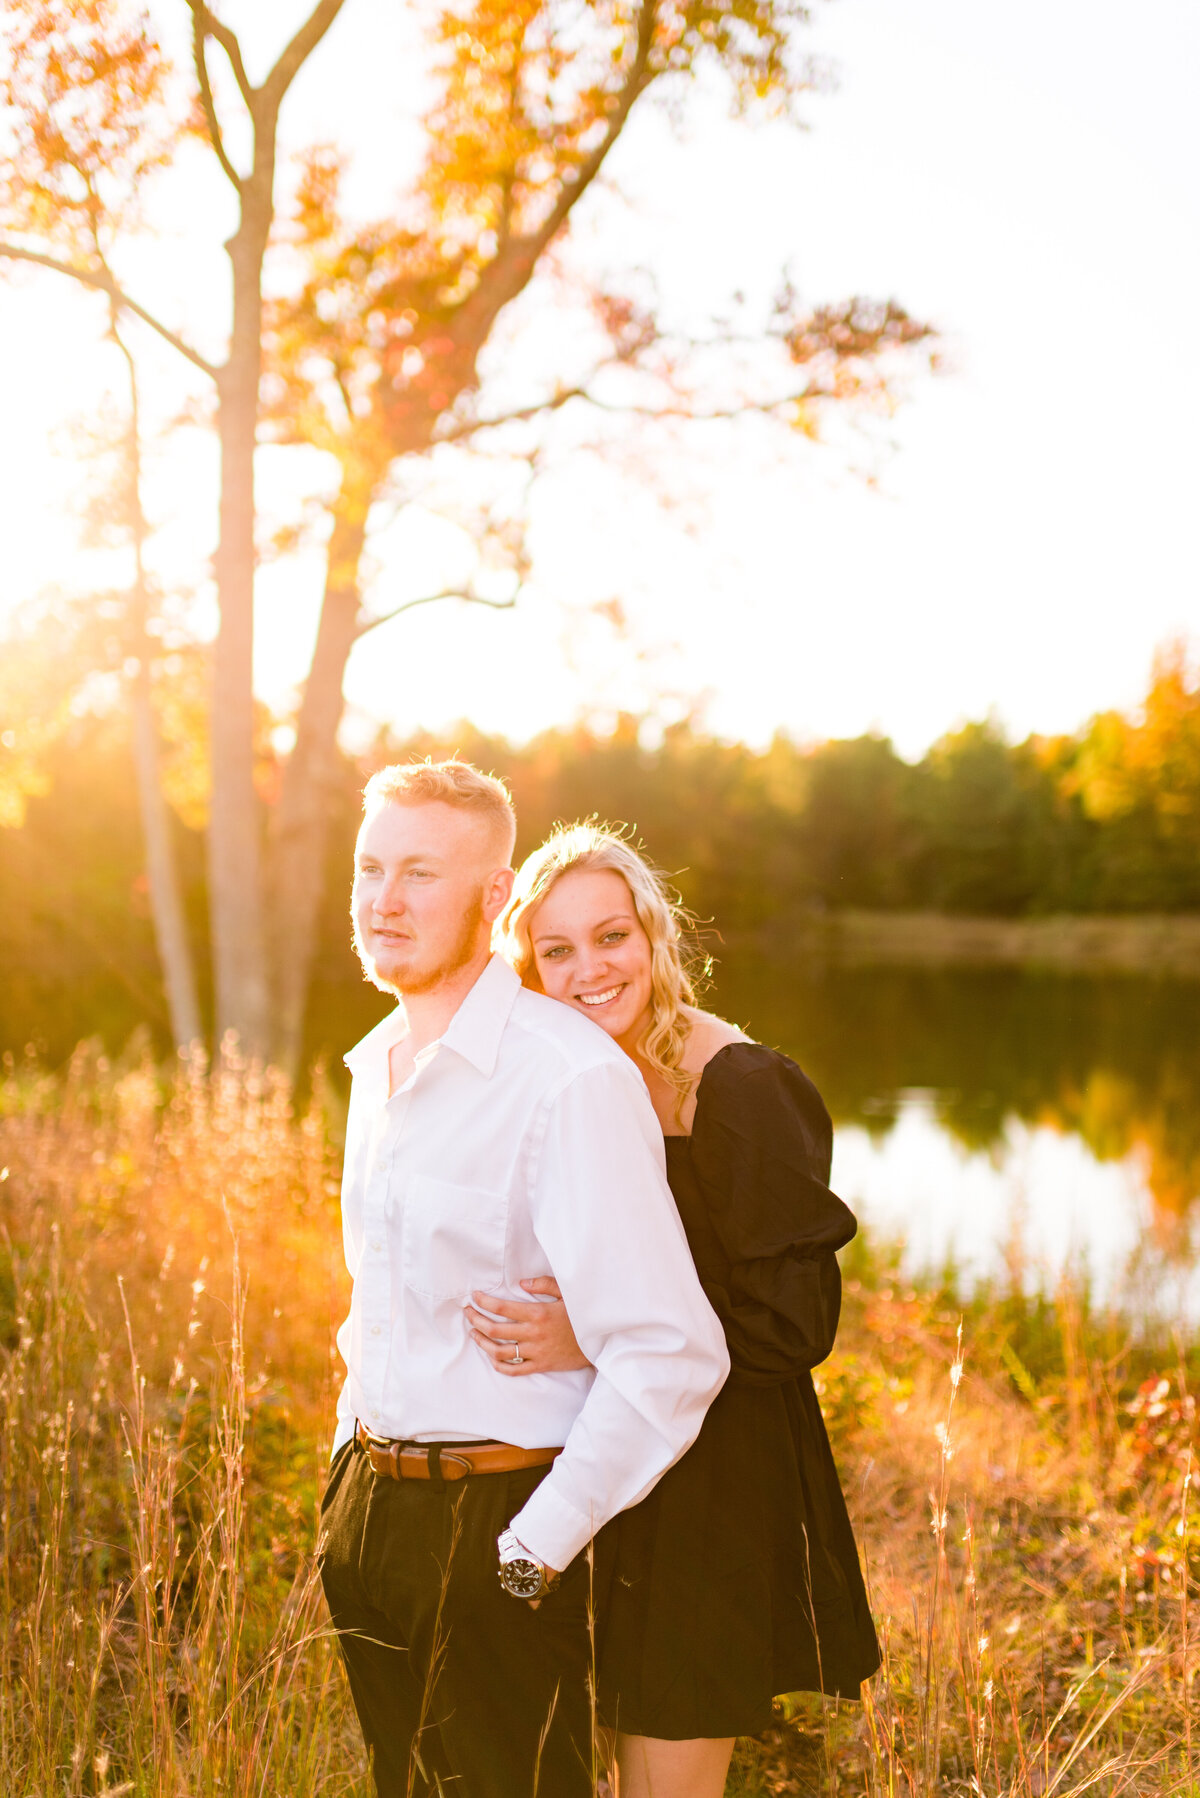 Haley + Andrew Engagements - Photography by Gerri Anna-81